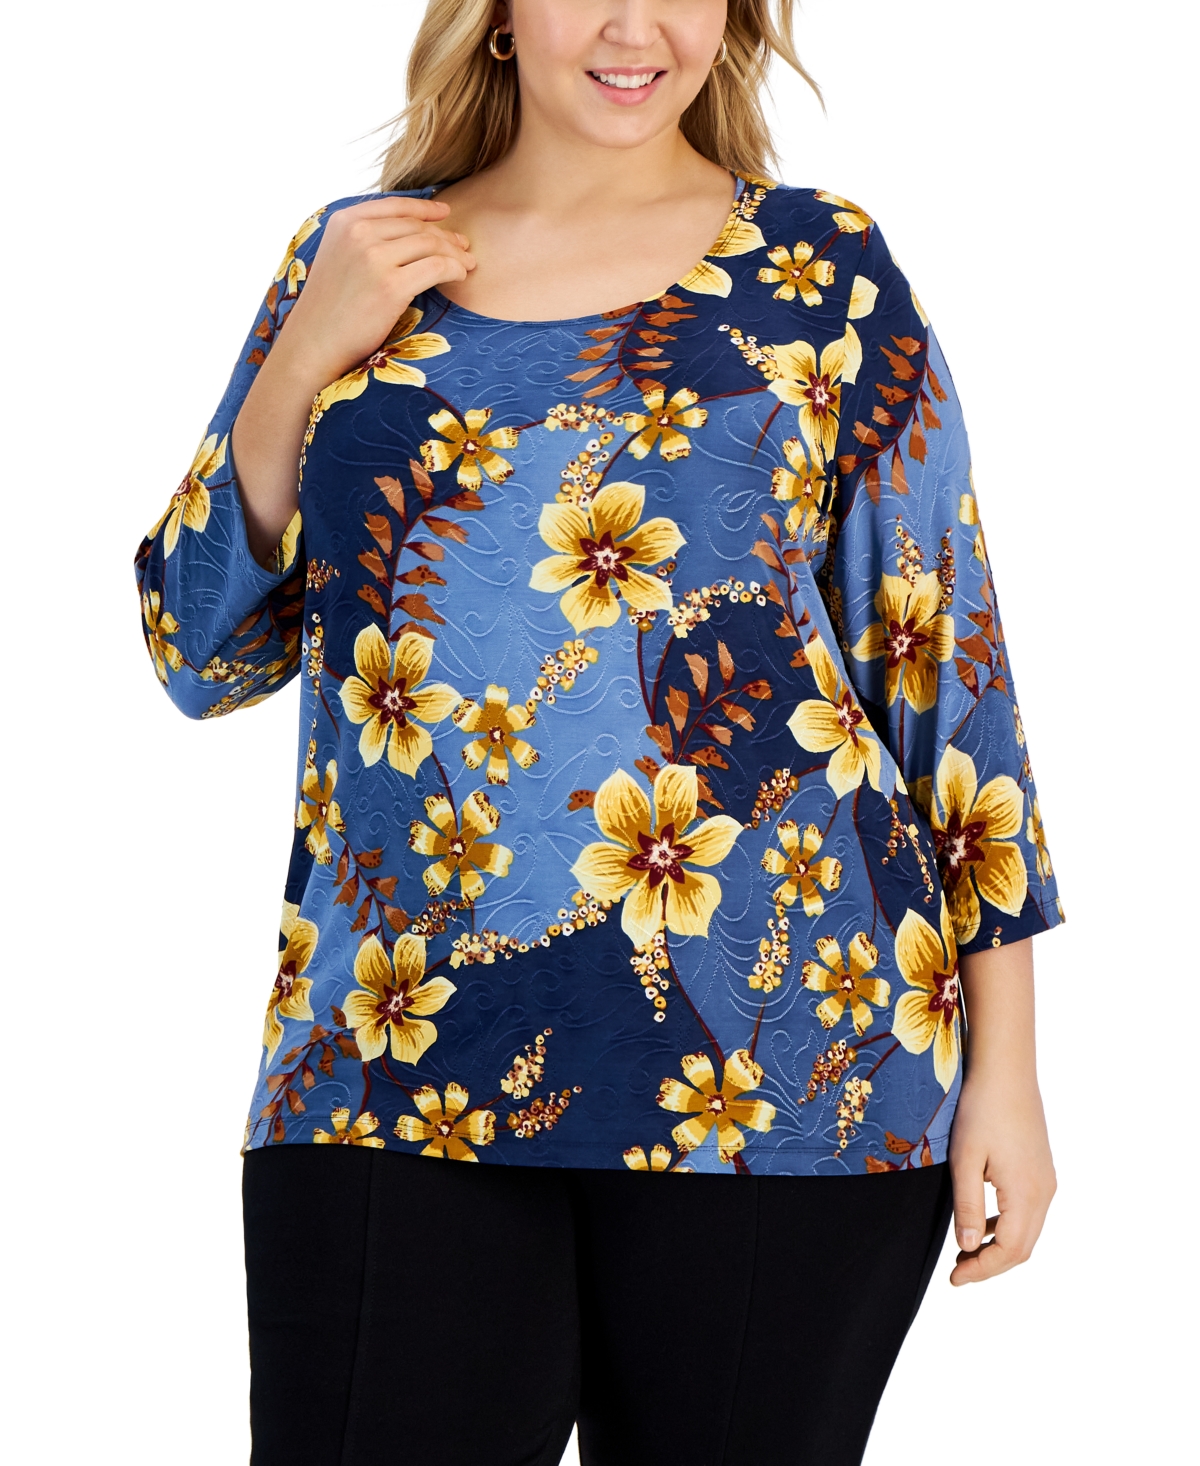 JM Collection Plus Size Solid Swing Top, Created for Macy's - Macy's